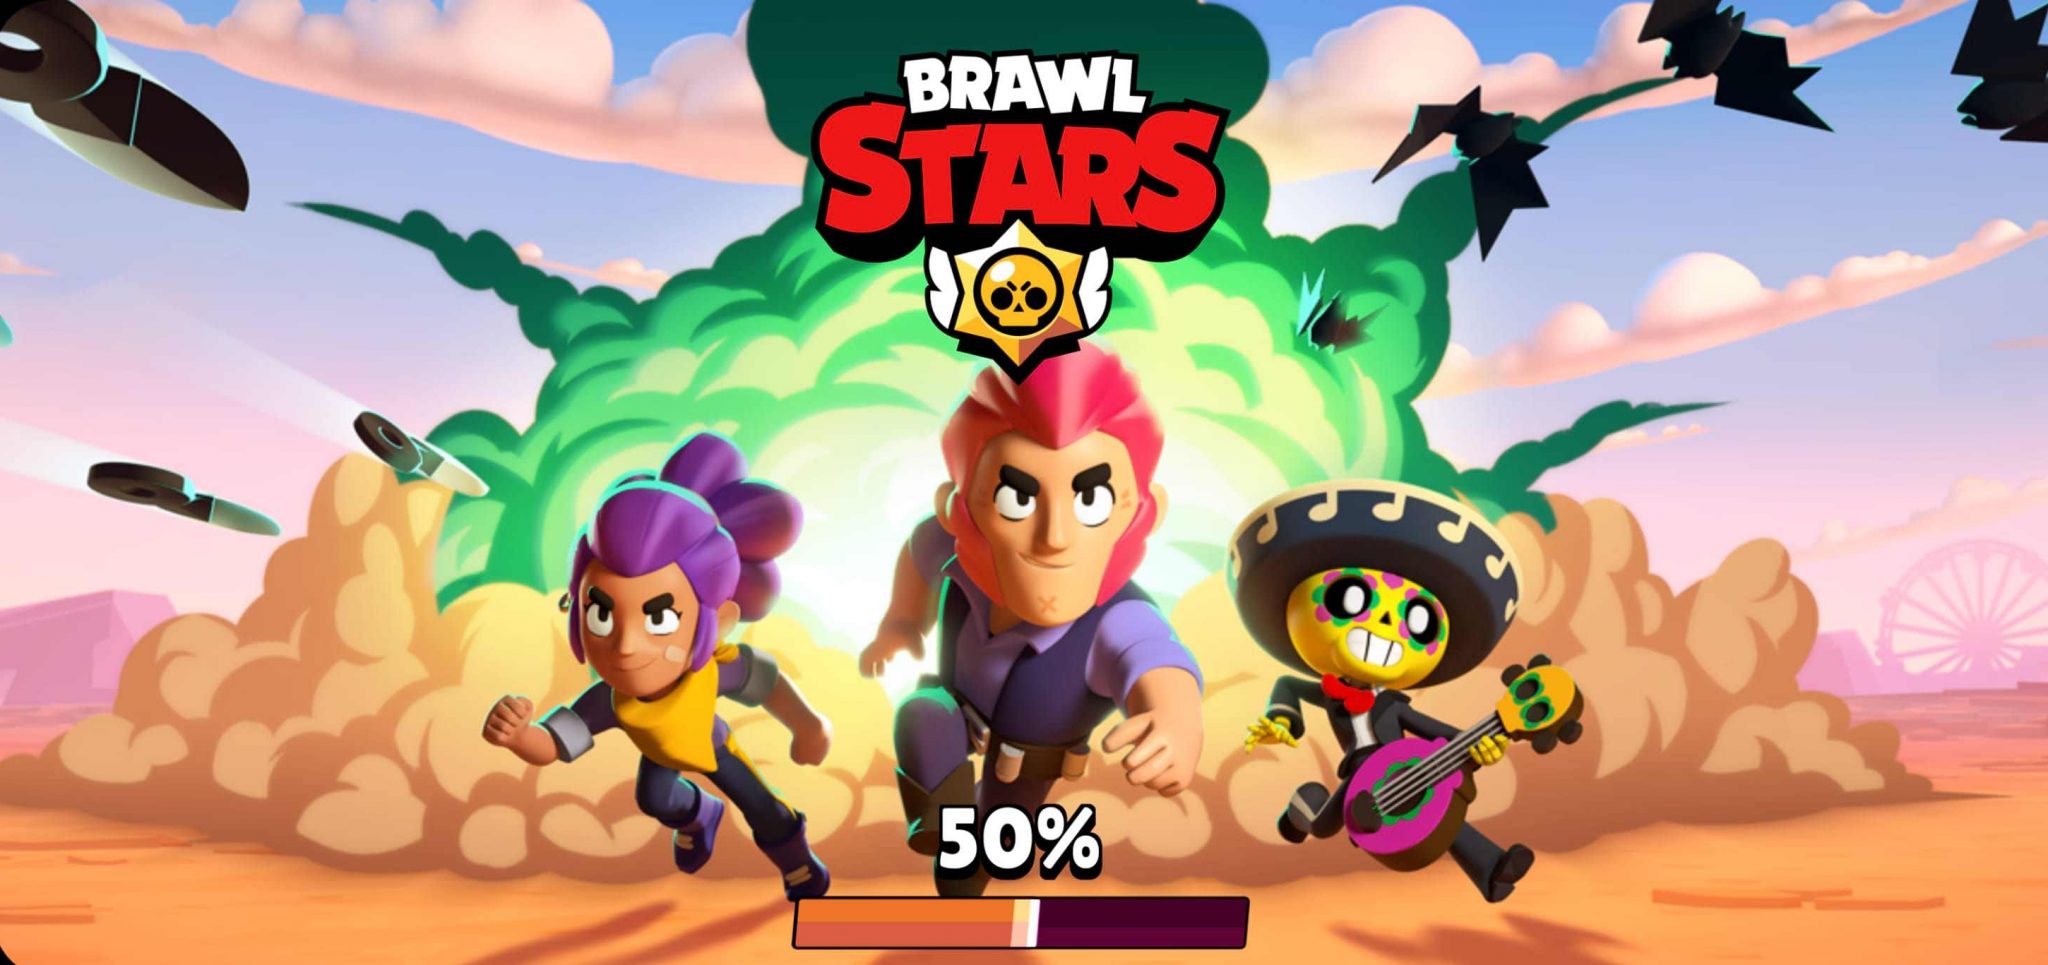 Brawl Stars Global Release Date today on Android